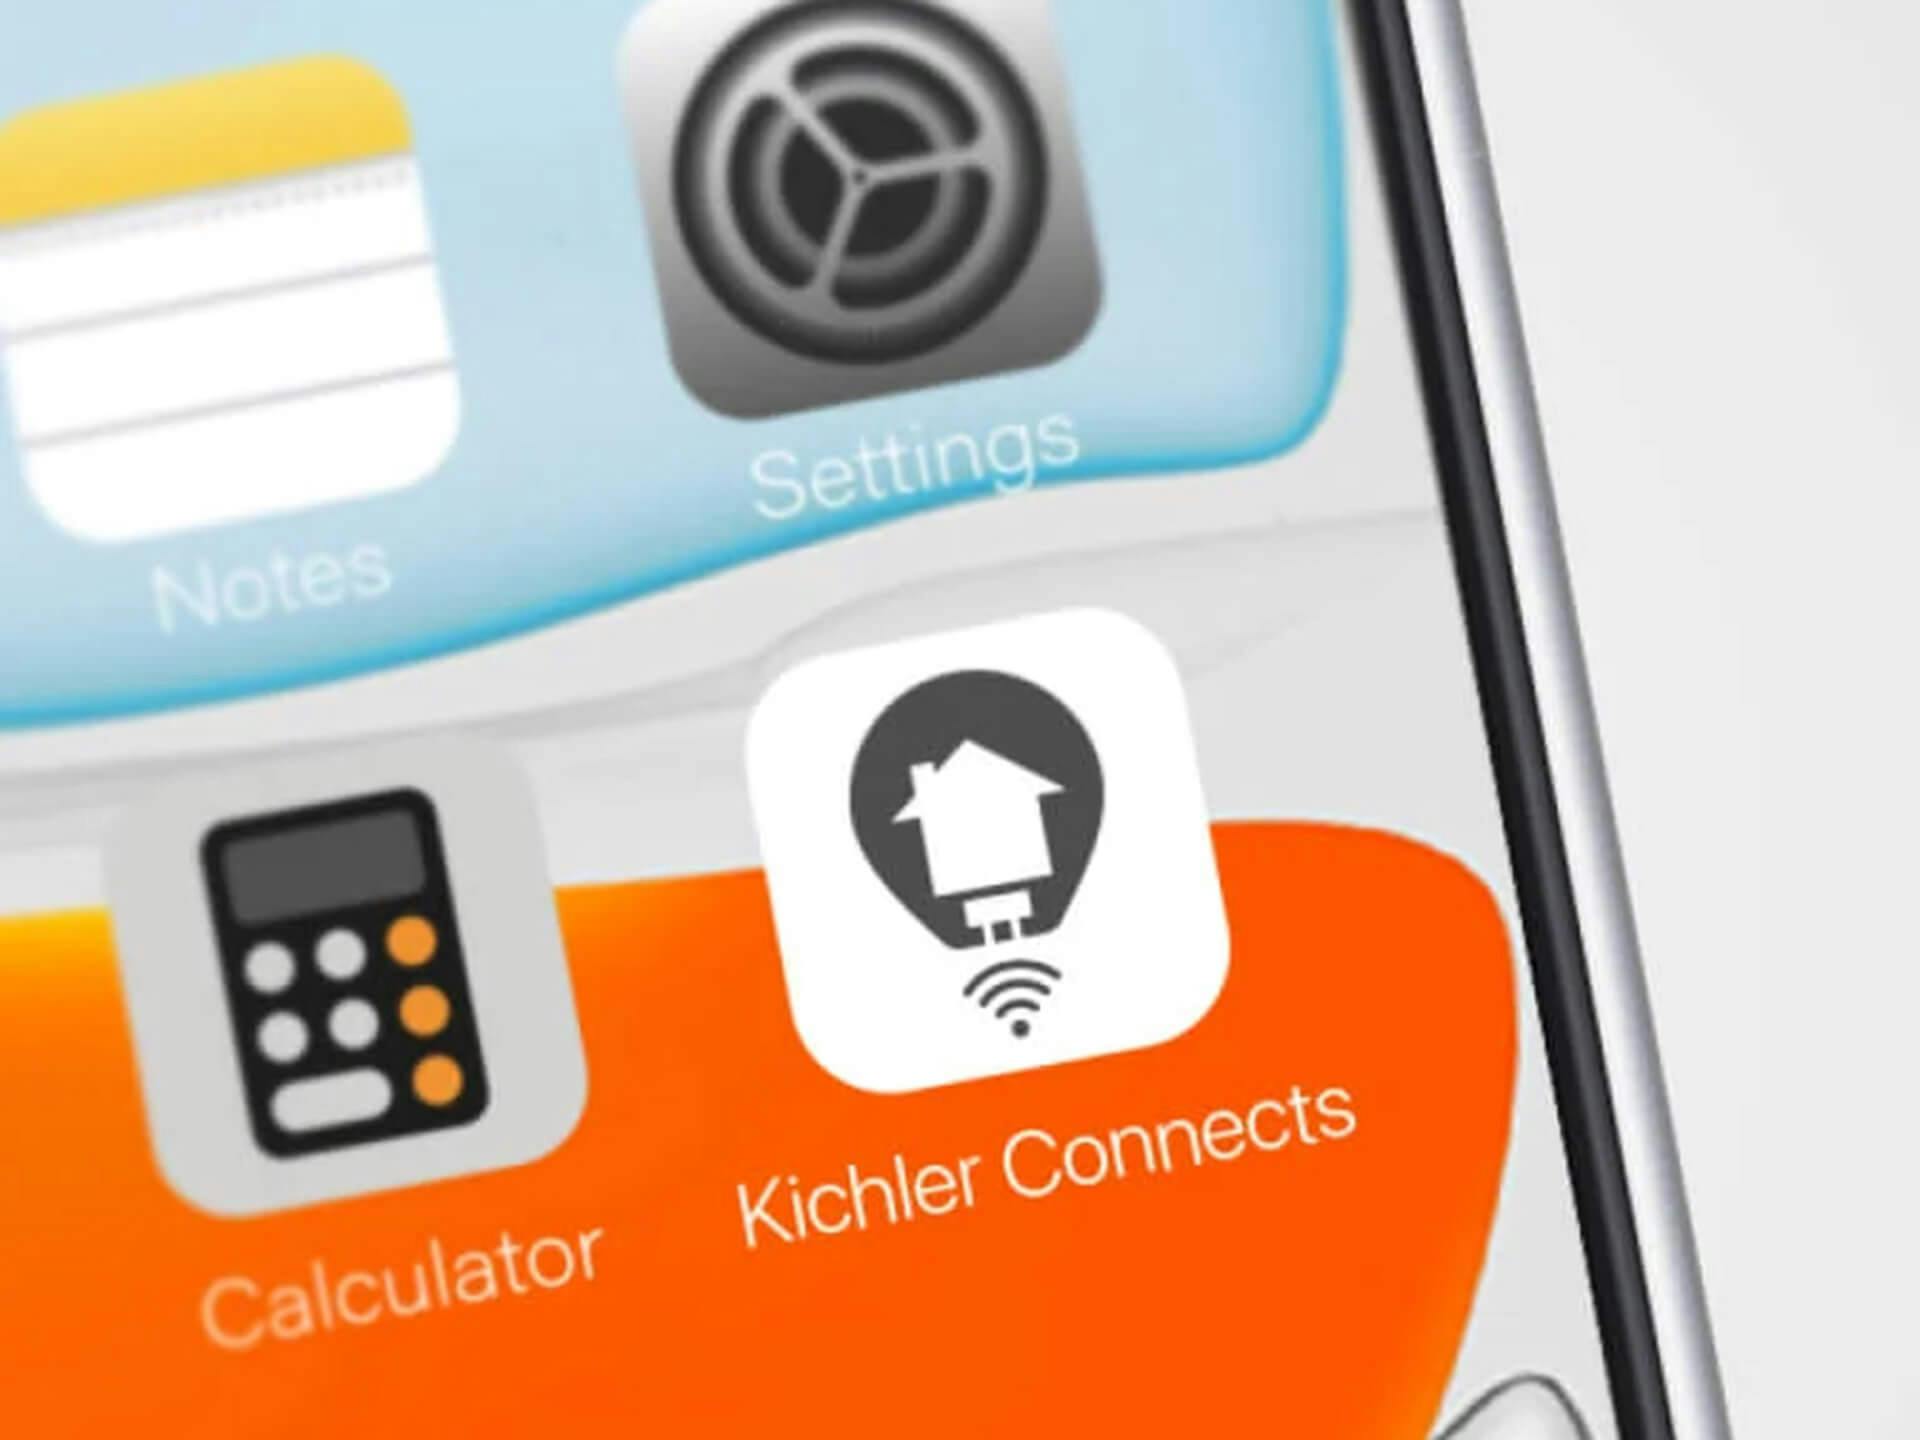 Part of an iPhone featuring the Kichler Connects app tile